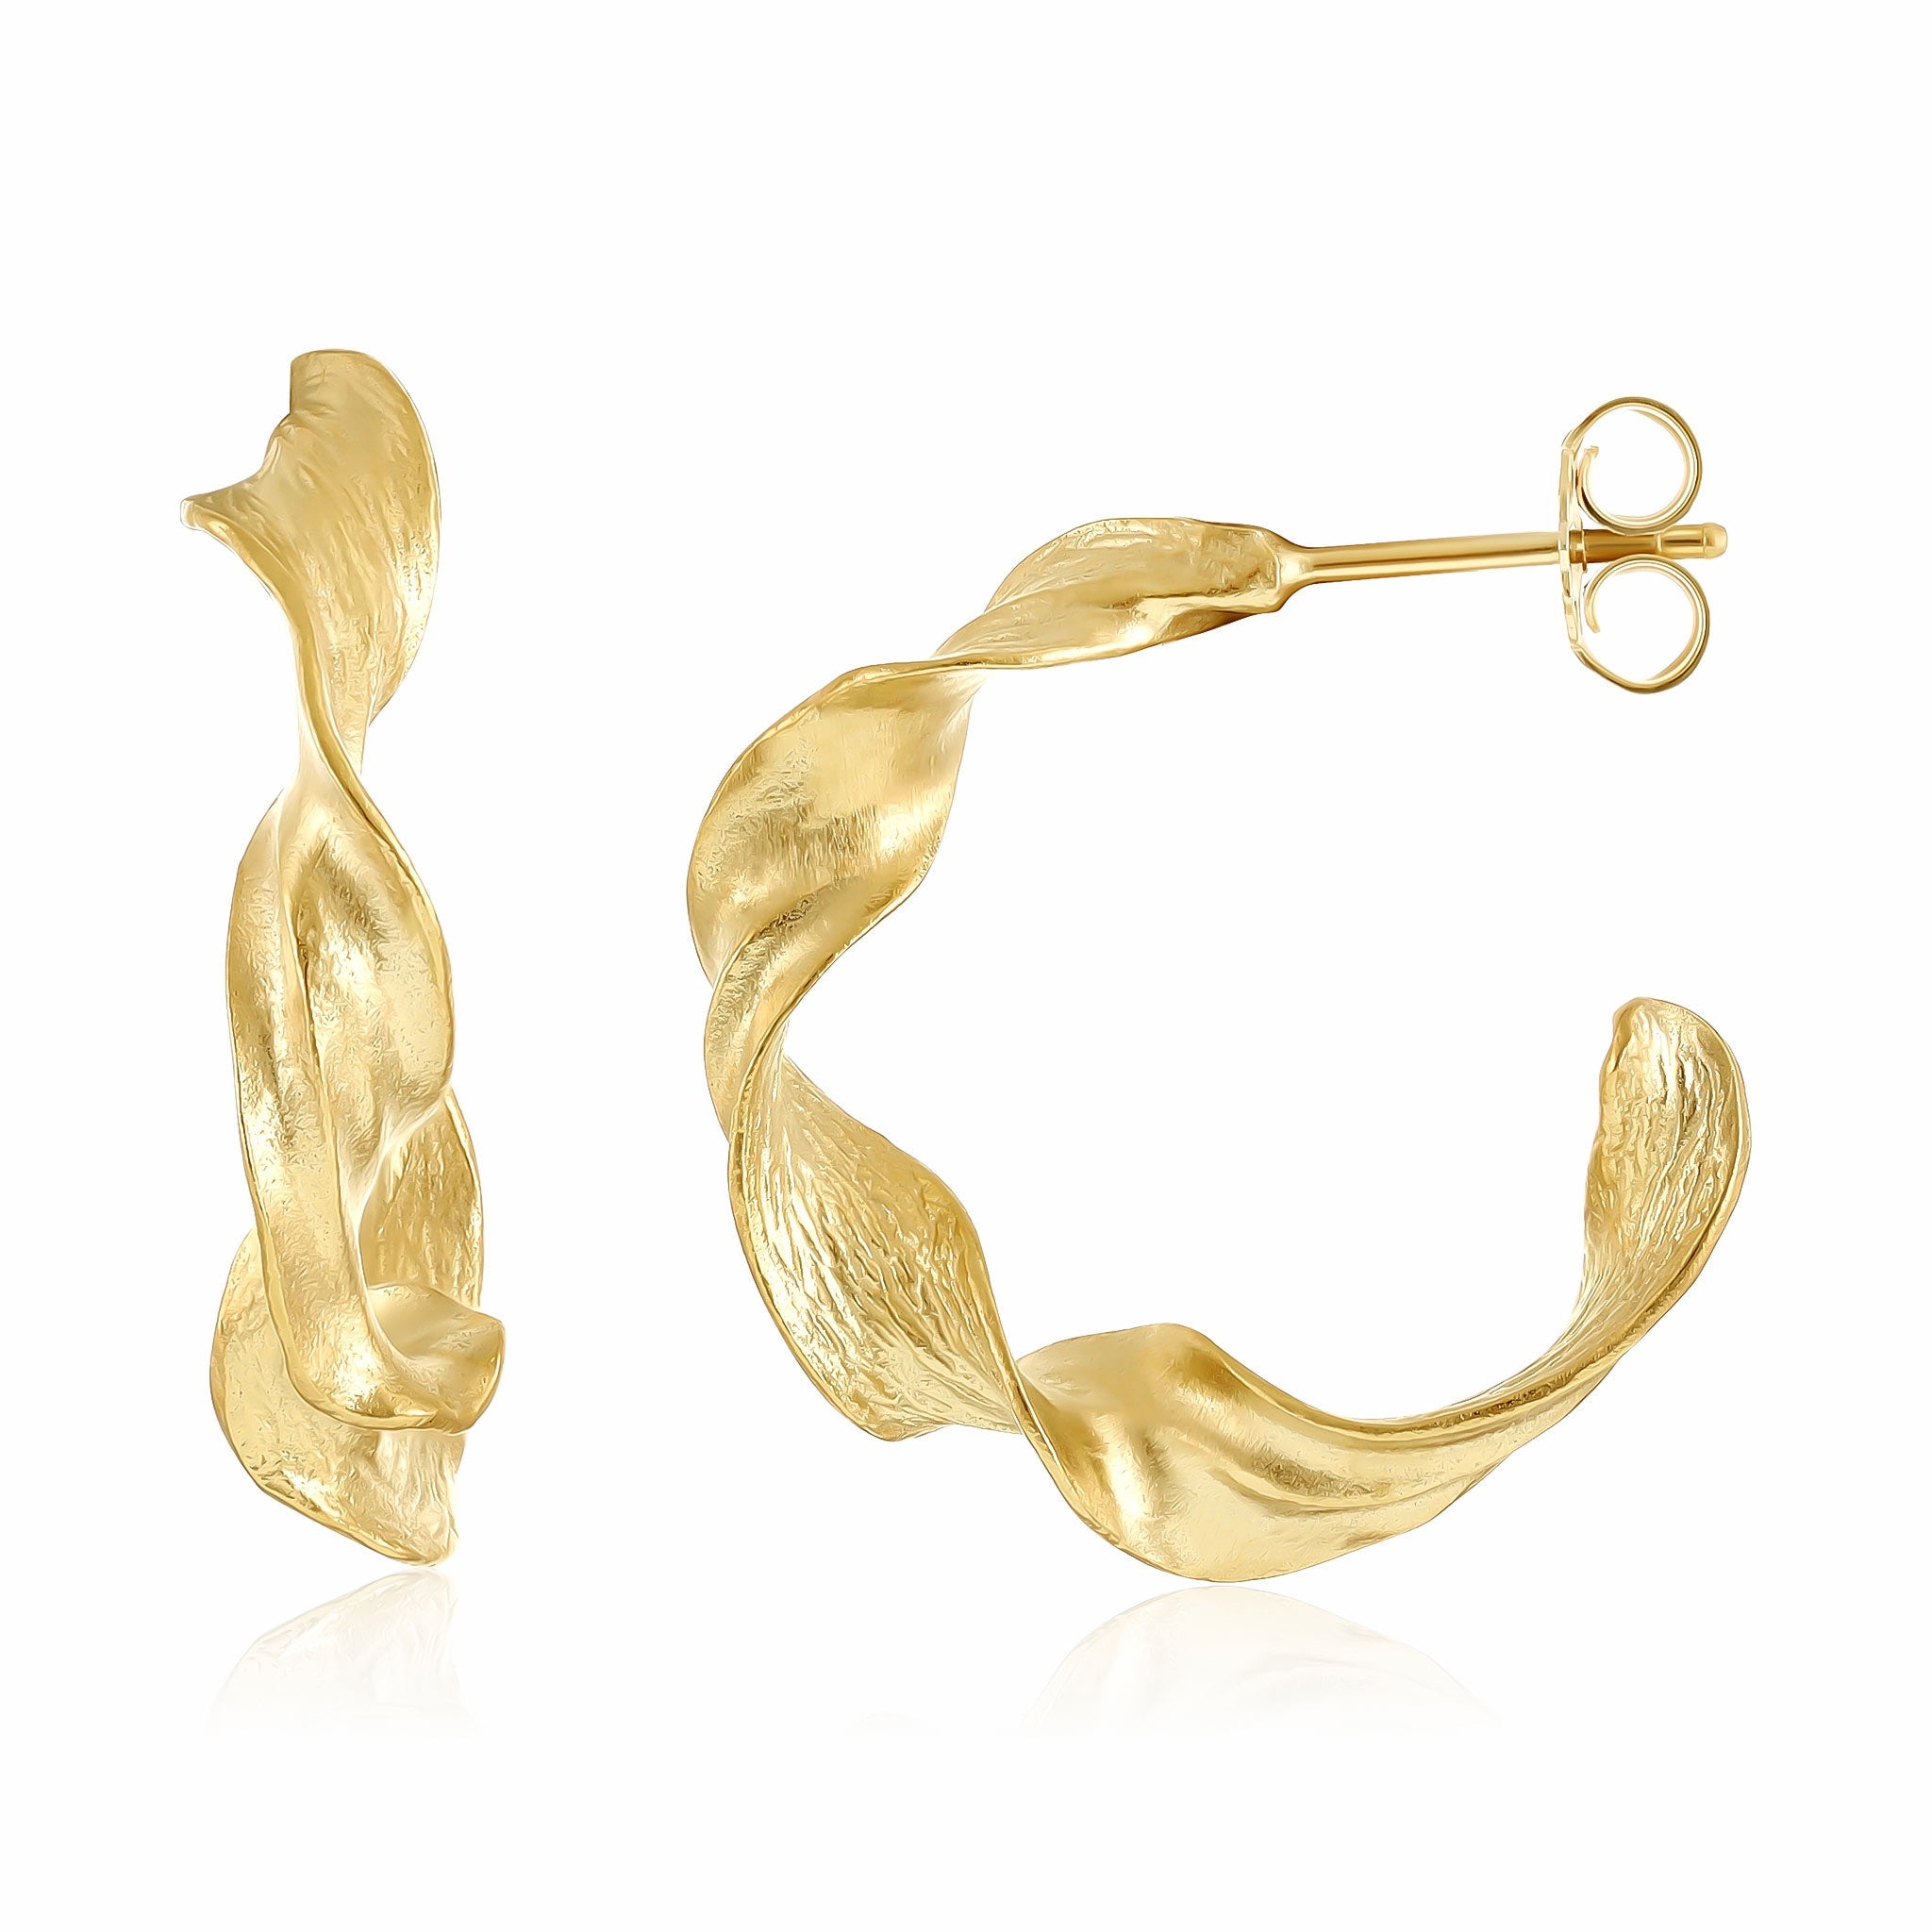 18ct 1 micron gold plated sterling silver twisted earrings PER3006 - FJewellery